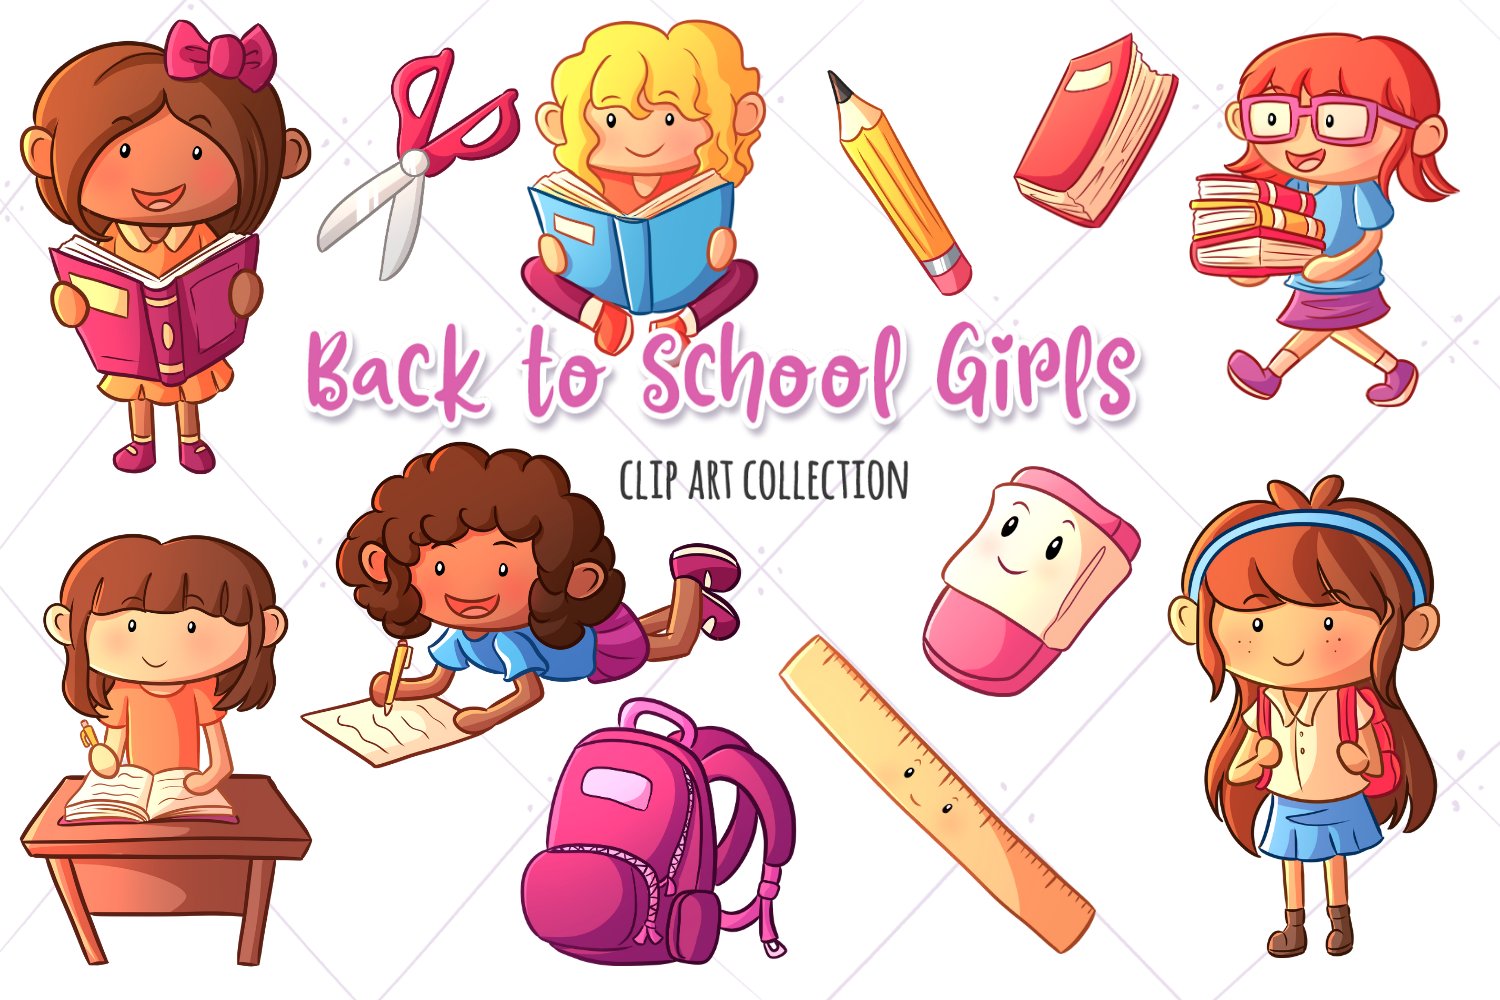 Back to School Girls Clip Art cover image.